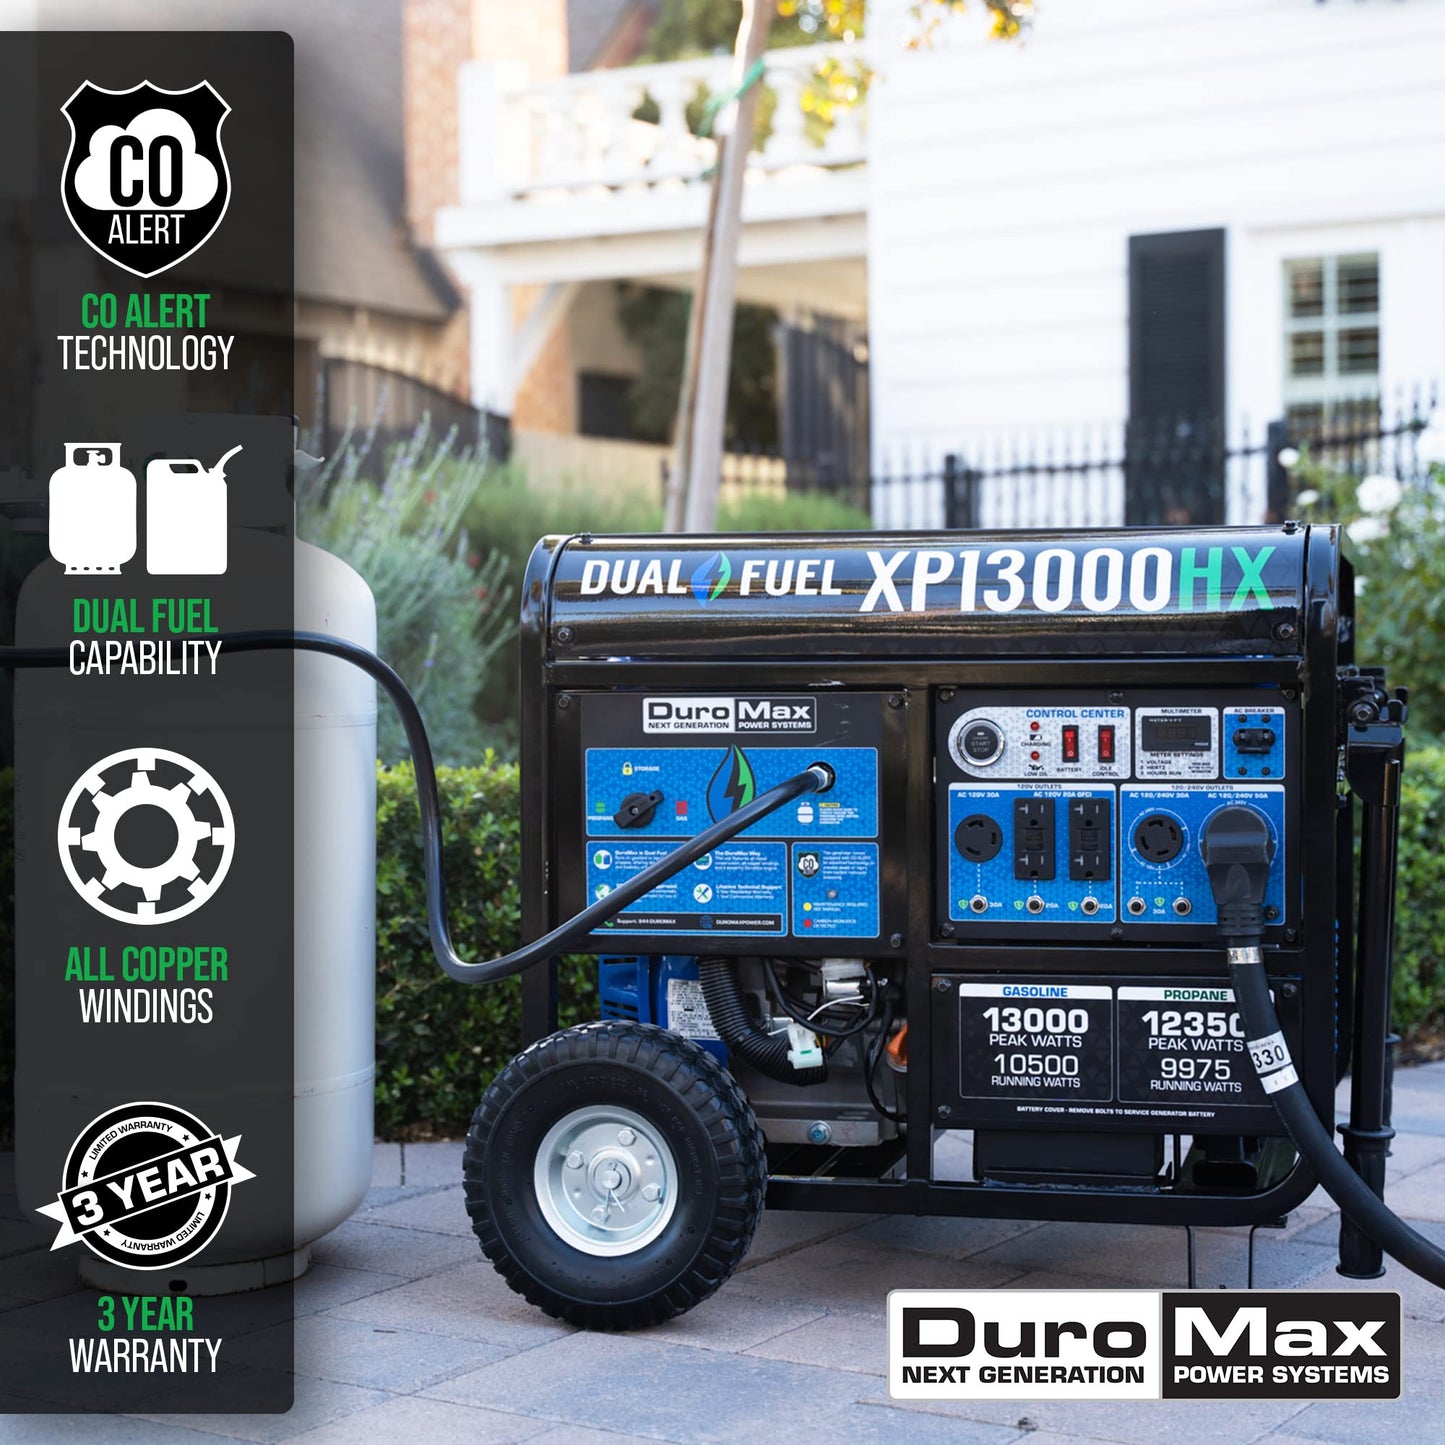 DuroMax XP13000HX Dual Fuel Portable Generator - 13000 Watt Gas or Propane Powered with Electric Start